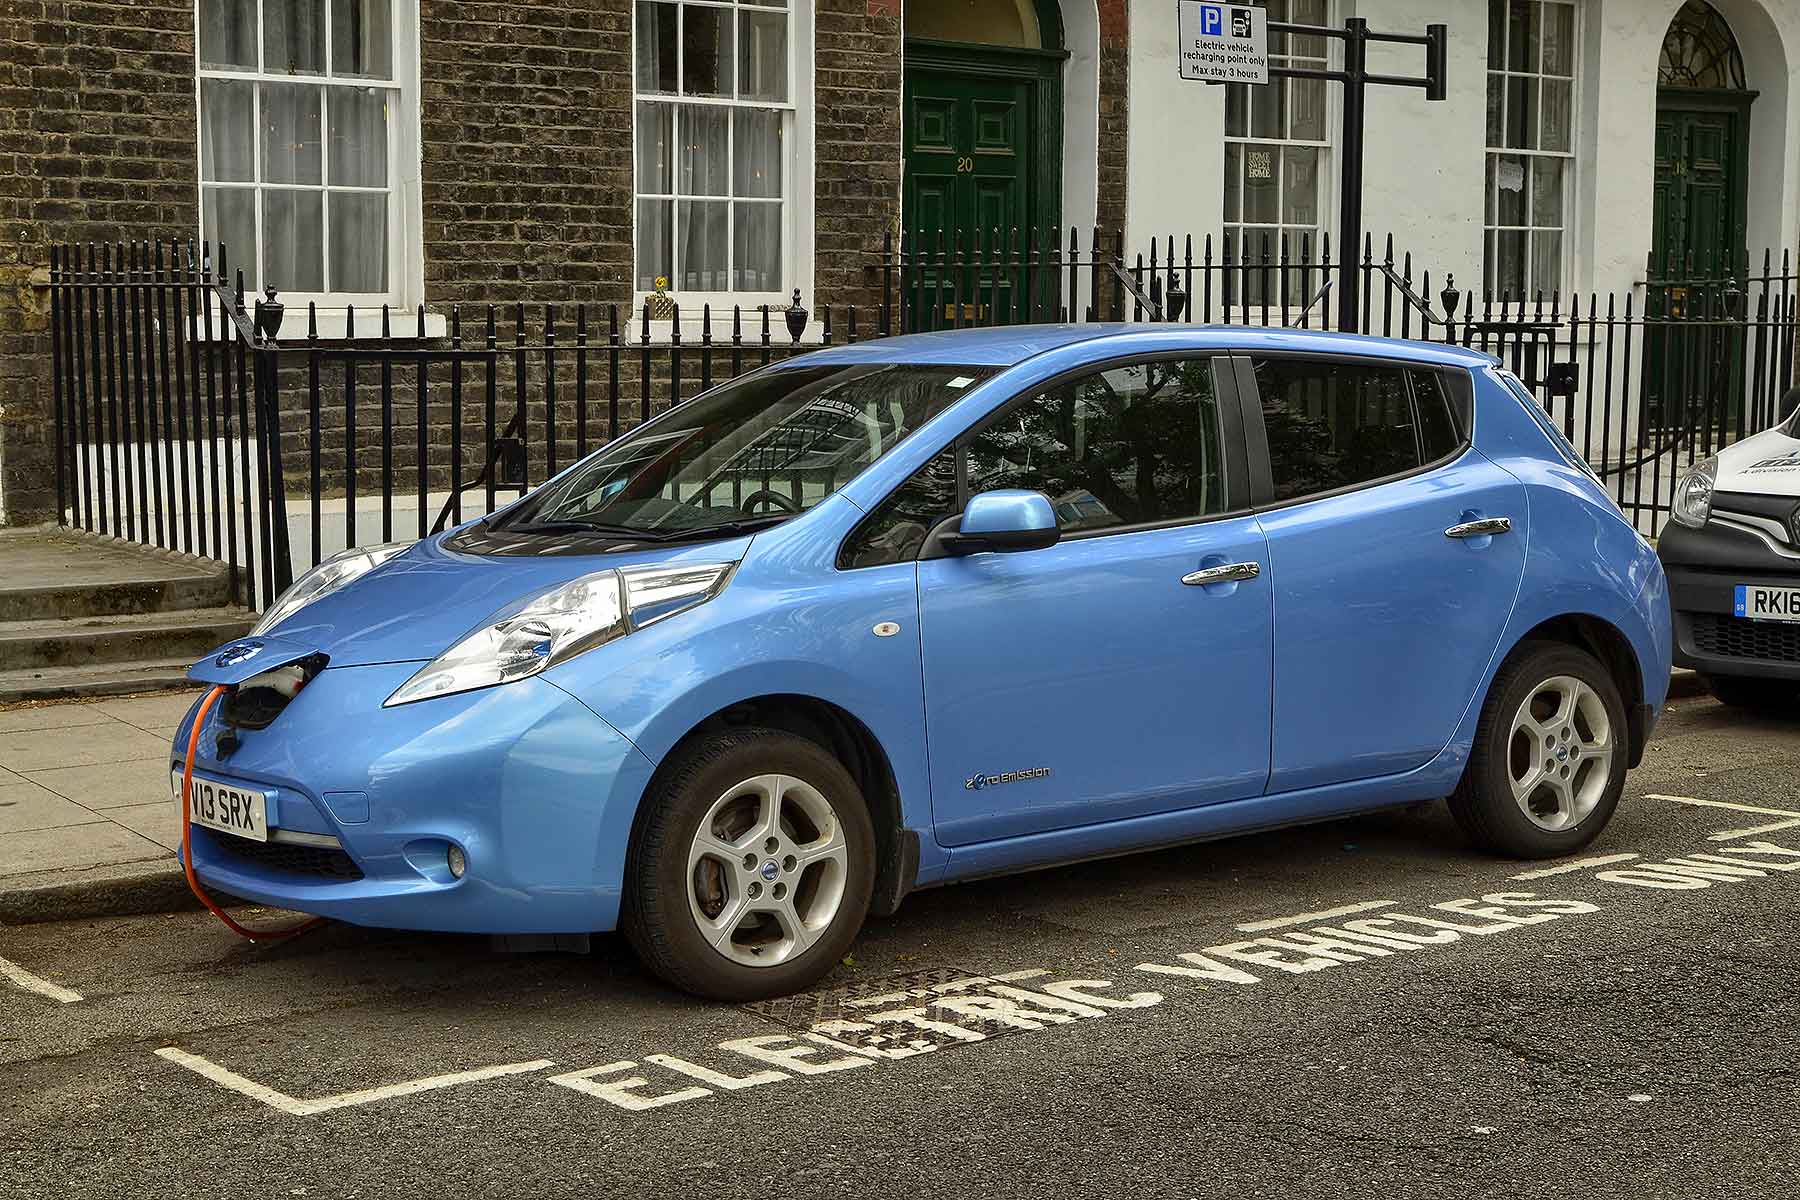 Nissan Leaf using an on-street electric car charging point